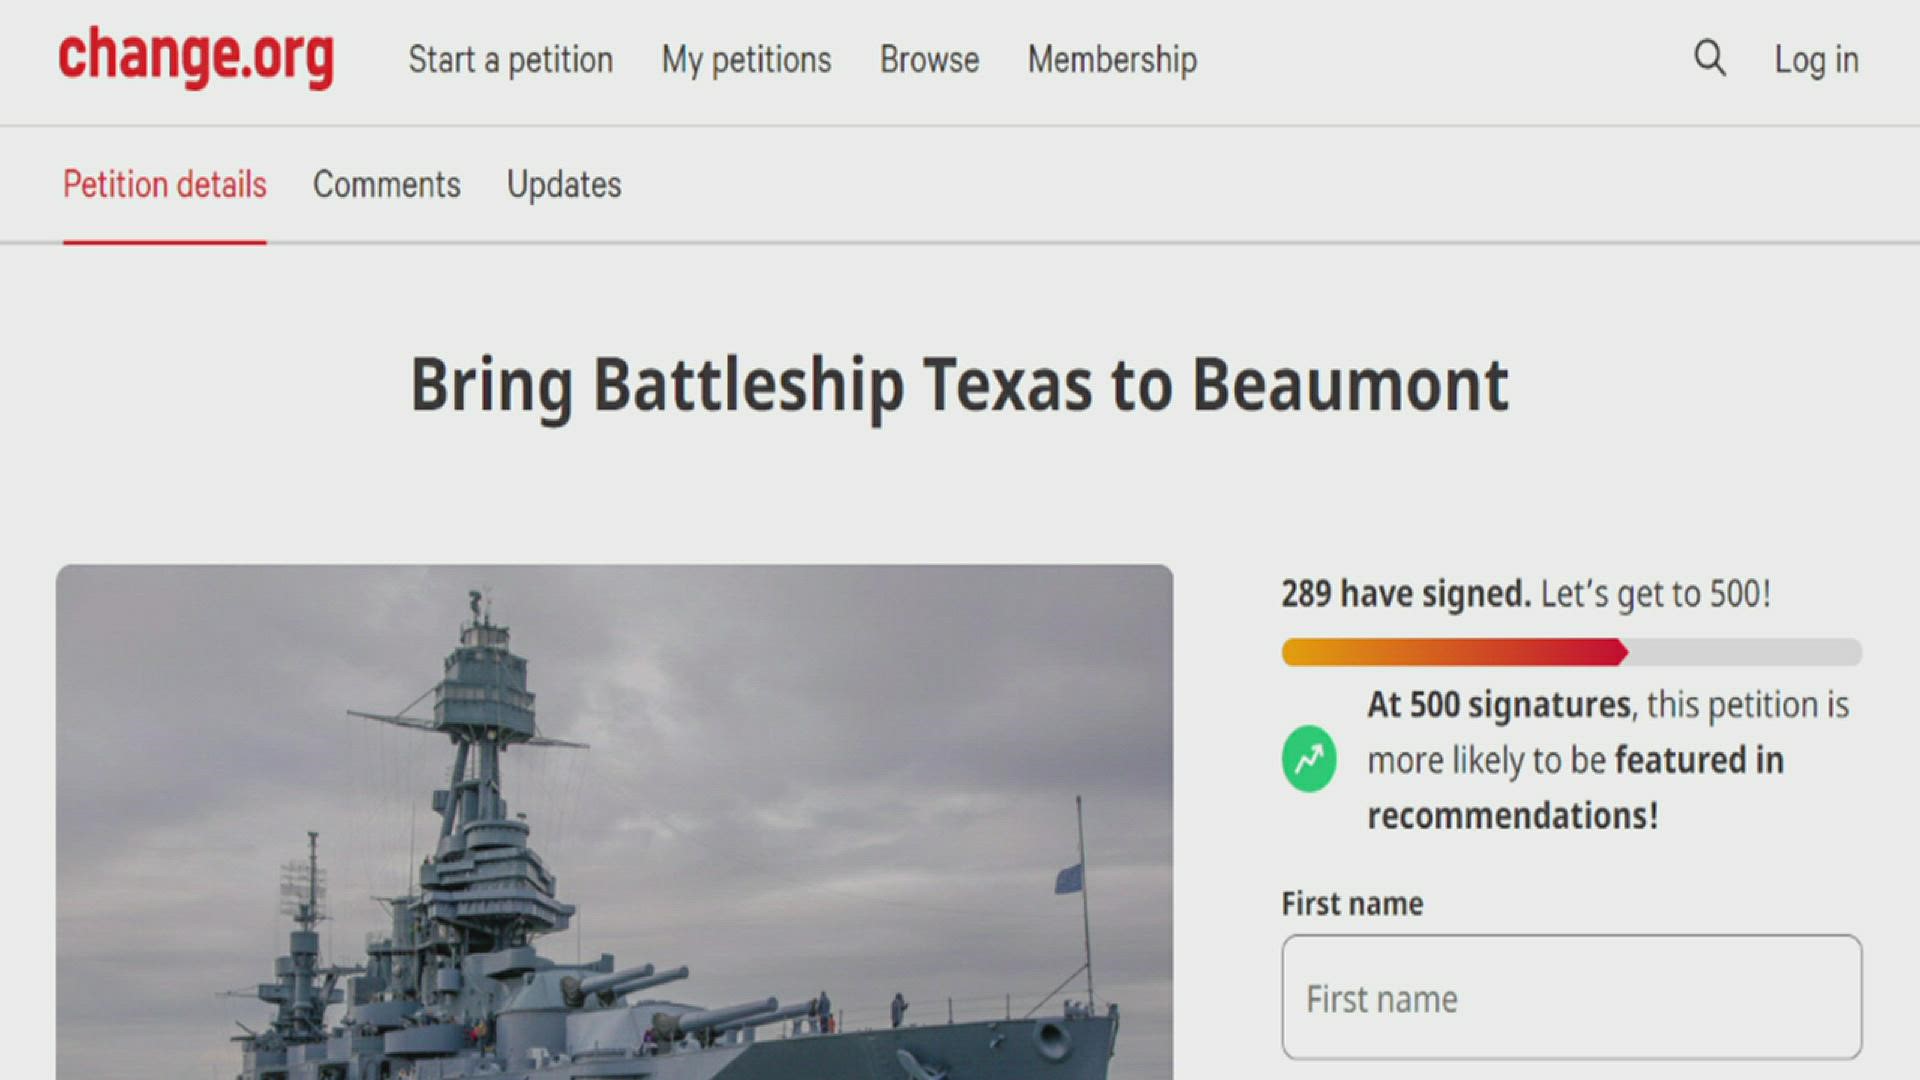 The petition has more than 300 signatures.